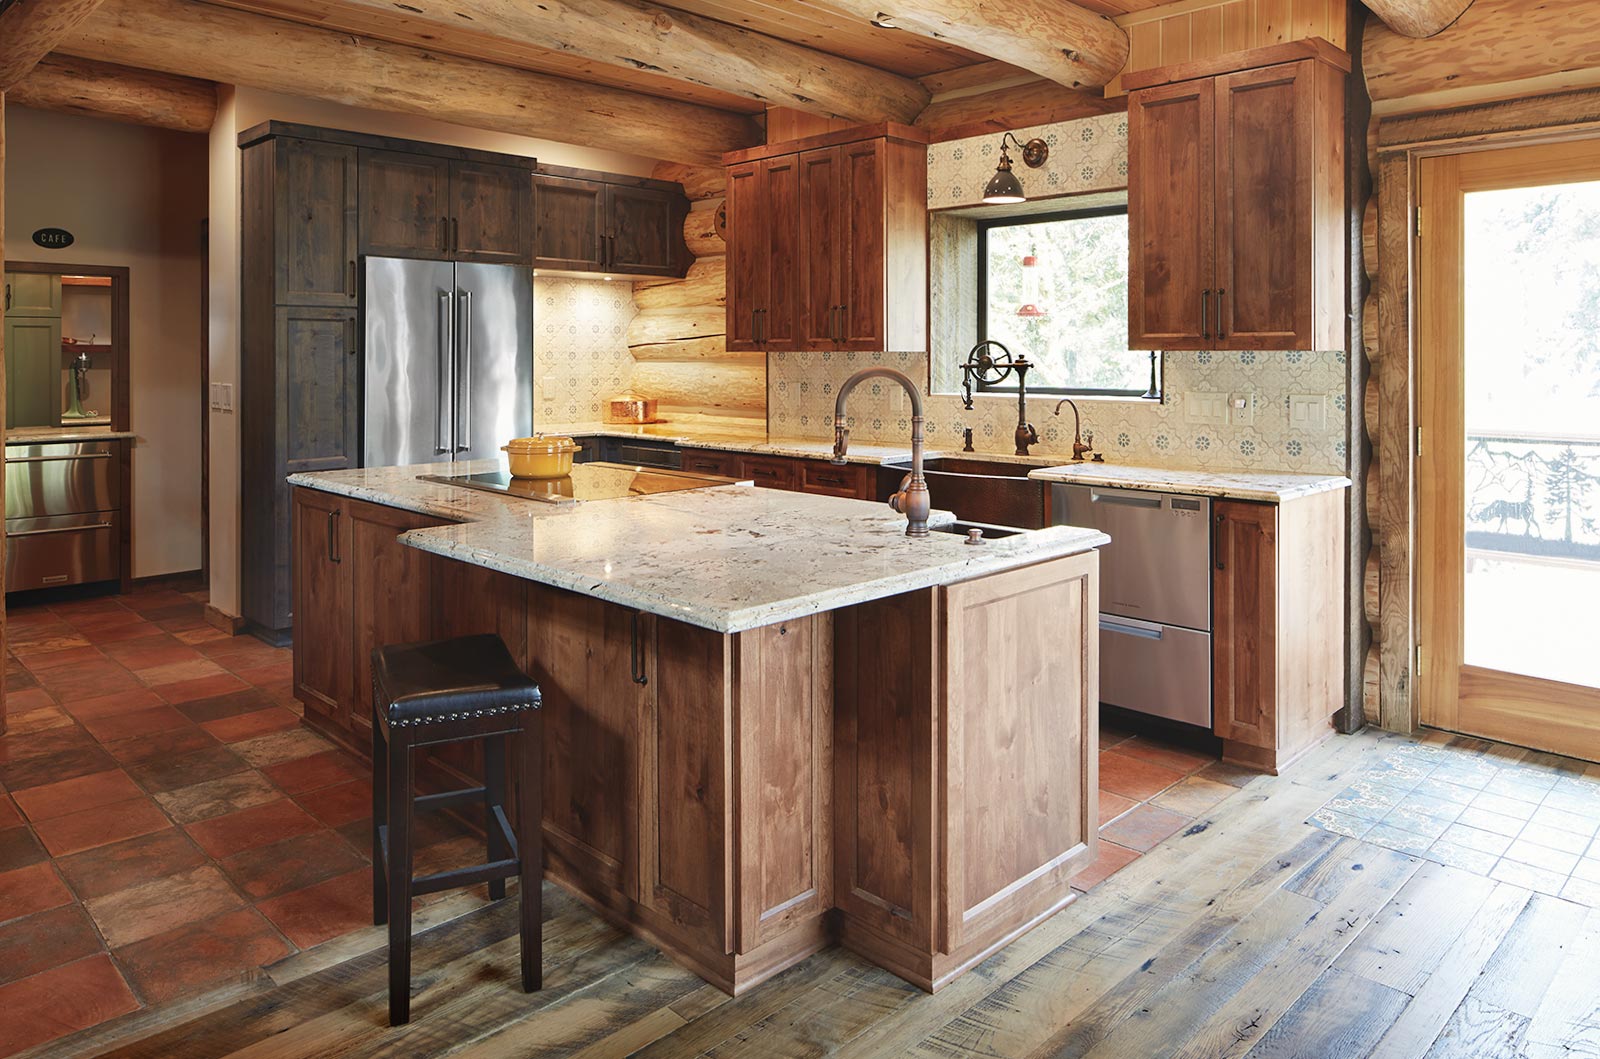 Transport rotary ring Kitchen Design - Charming Log Cabin Albany, OR